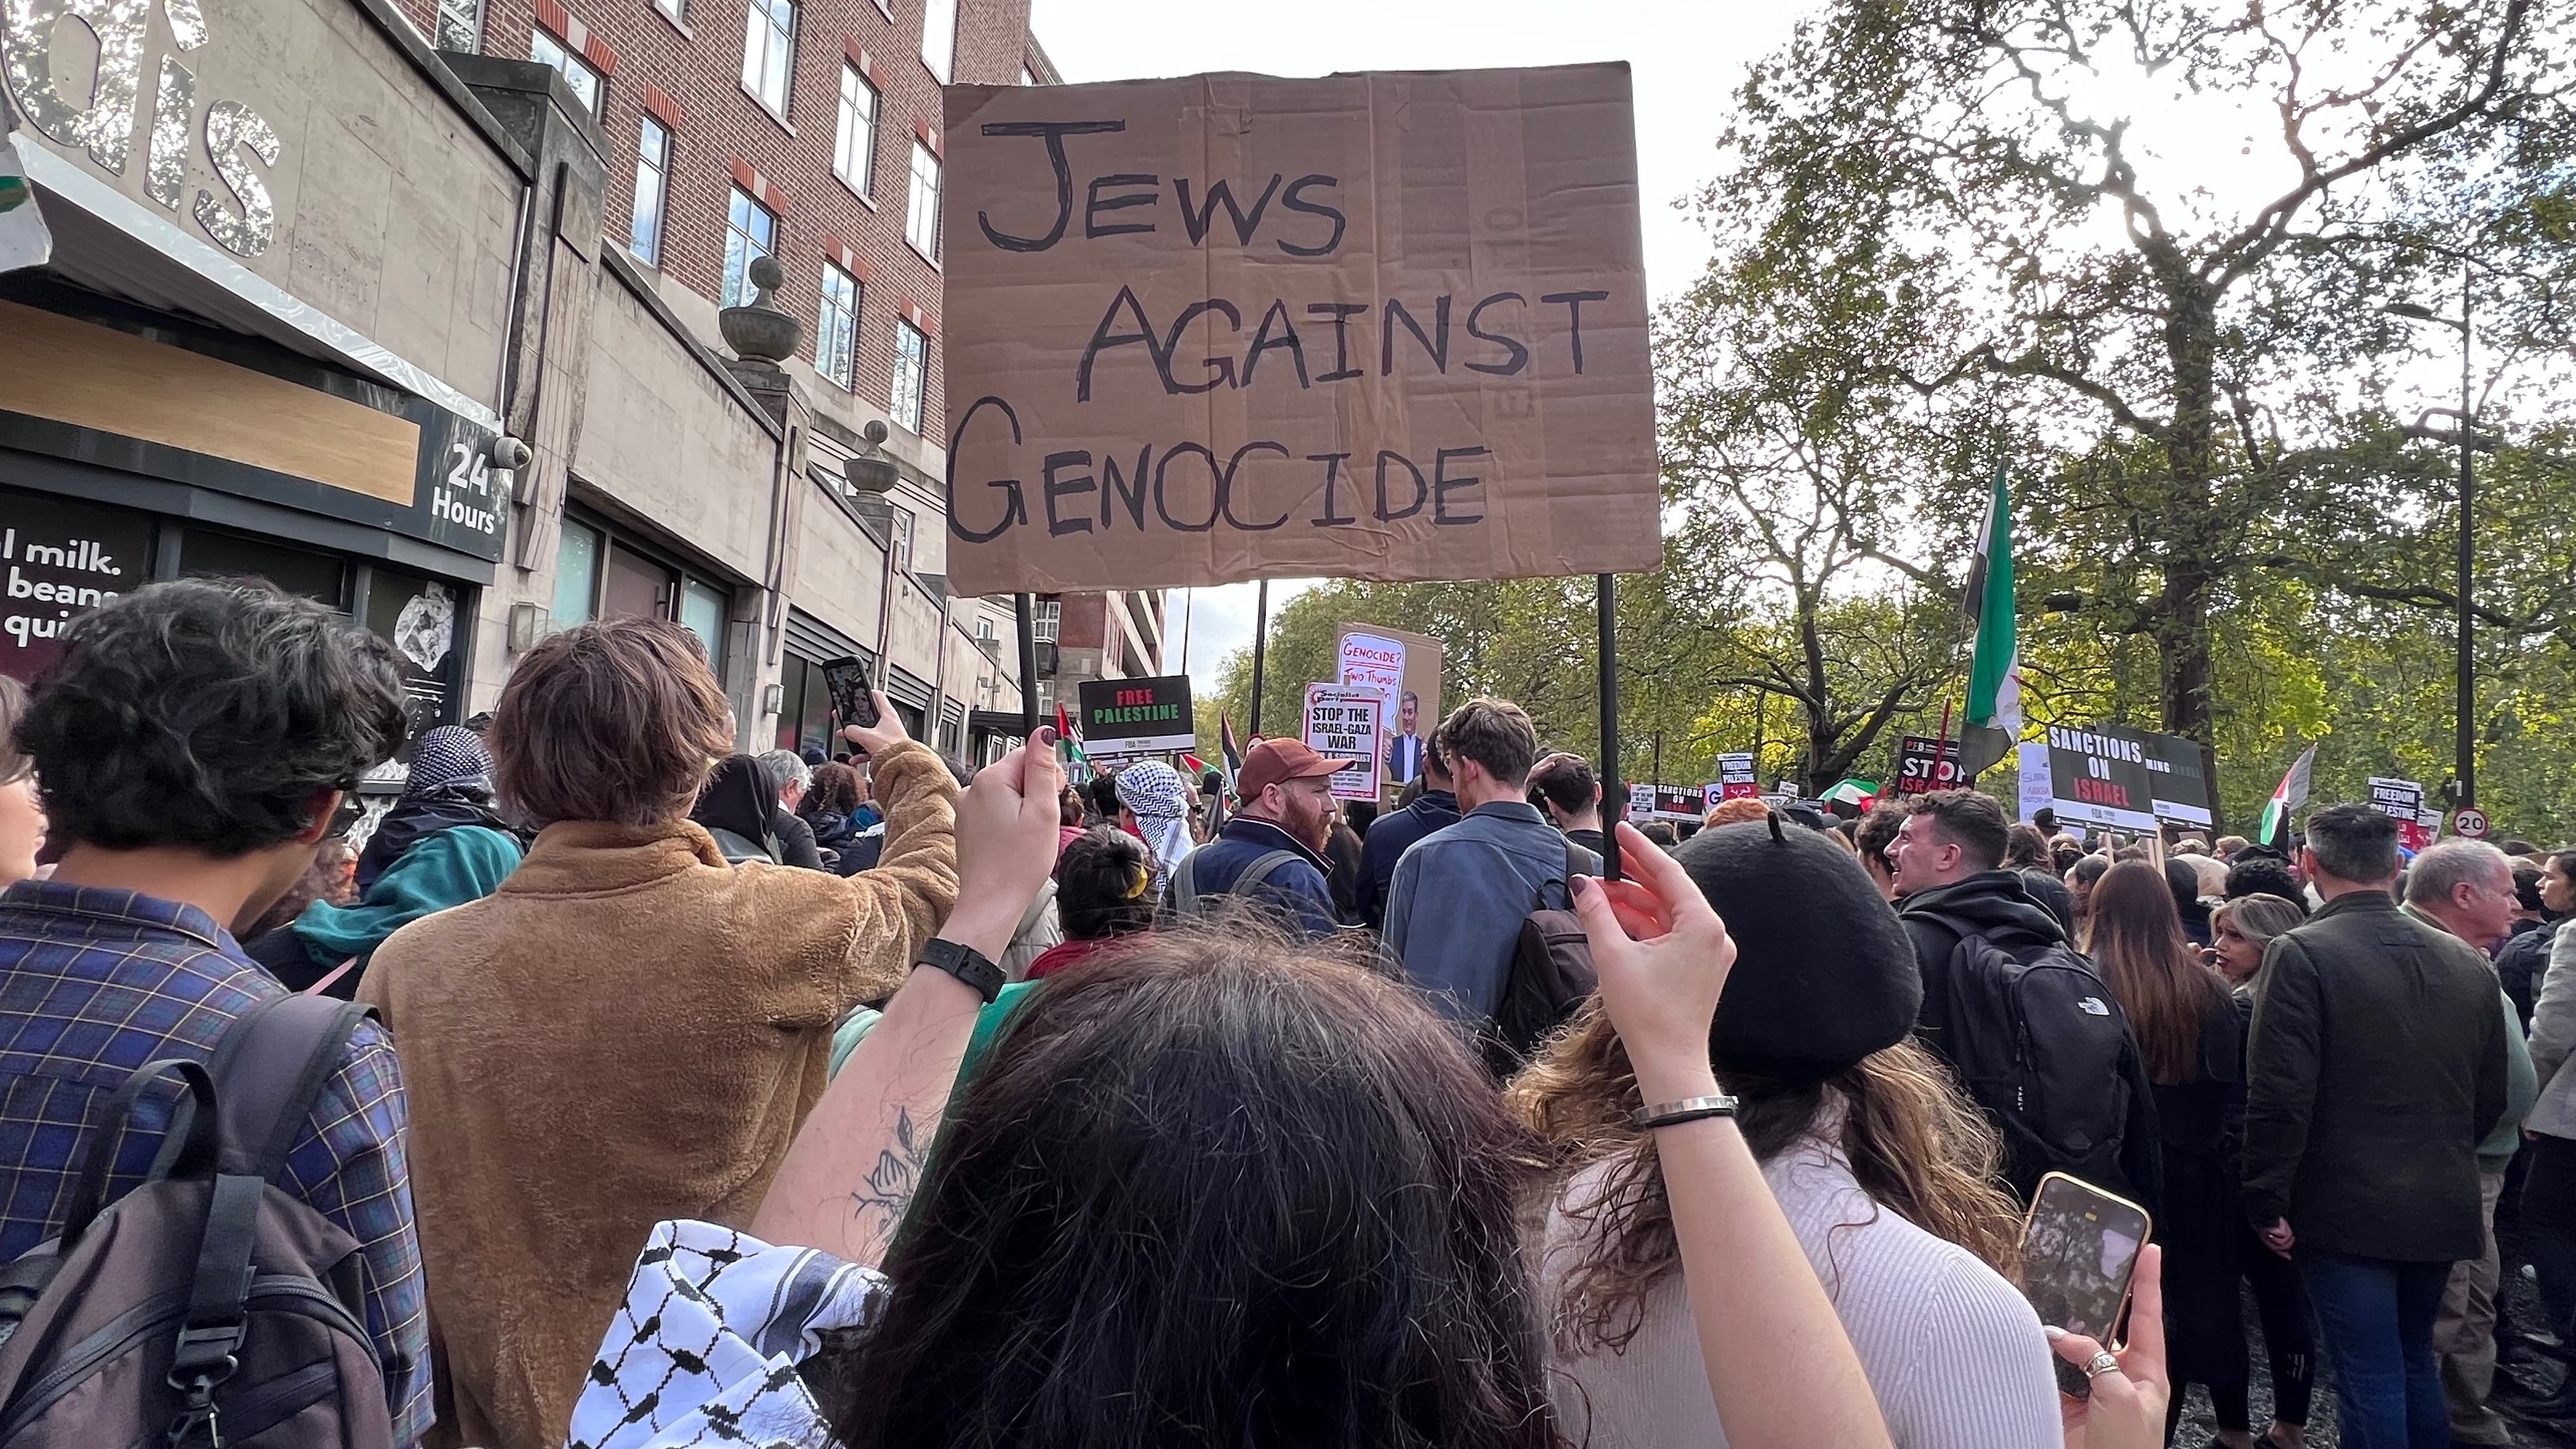 Esther Jones holding a sign labelled “Jews against genocide” during the pro-Palestine March (MEE/Areeb Ullah)